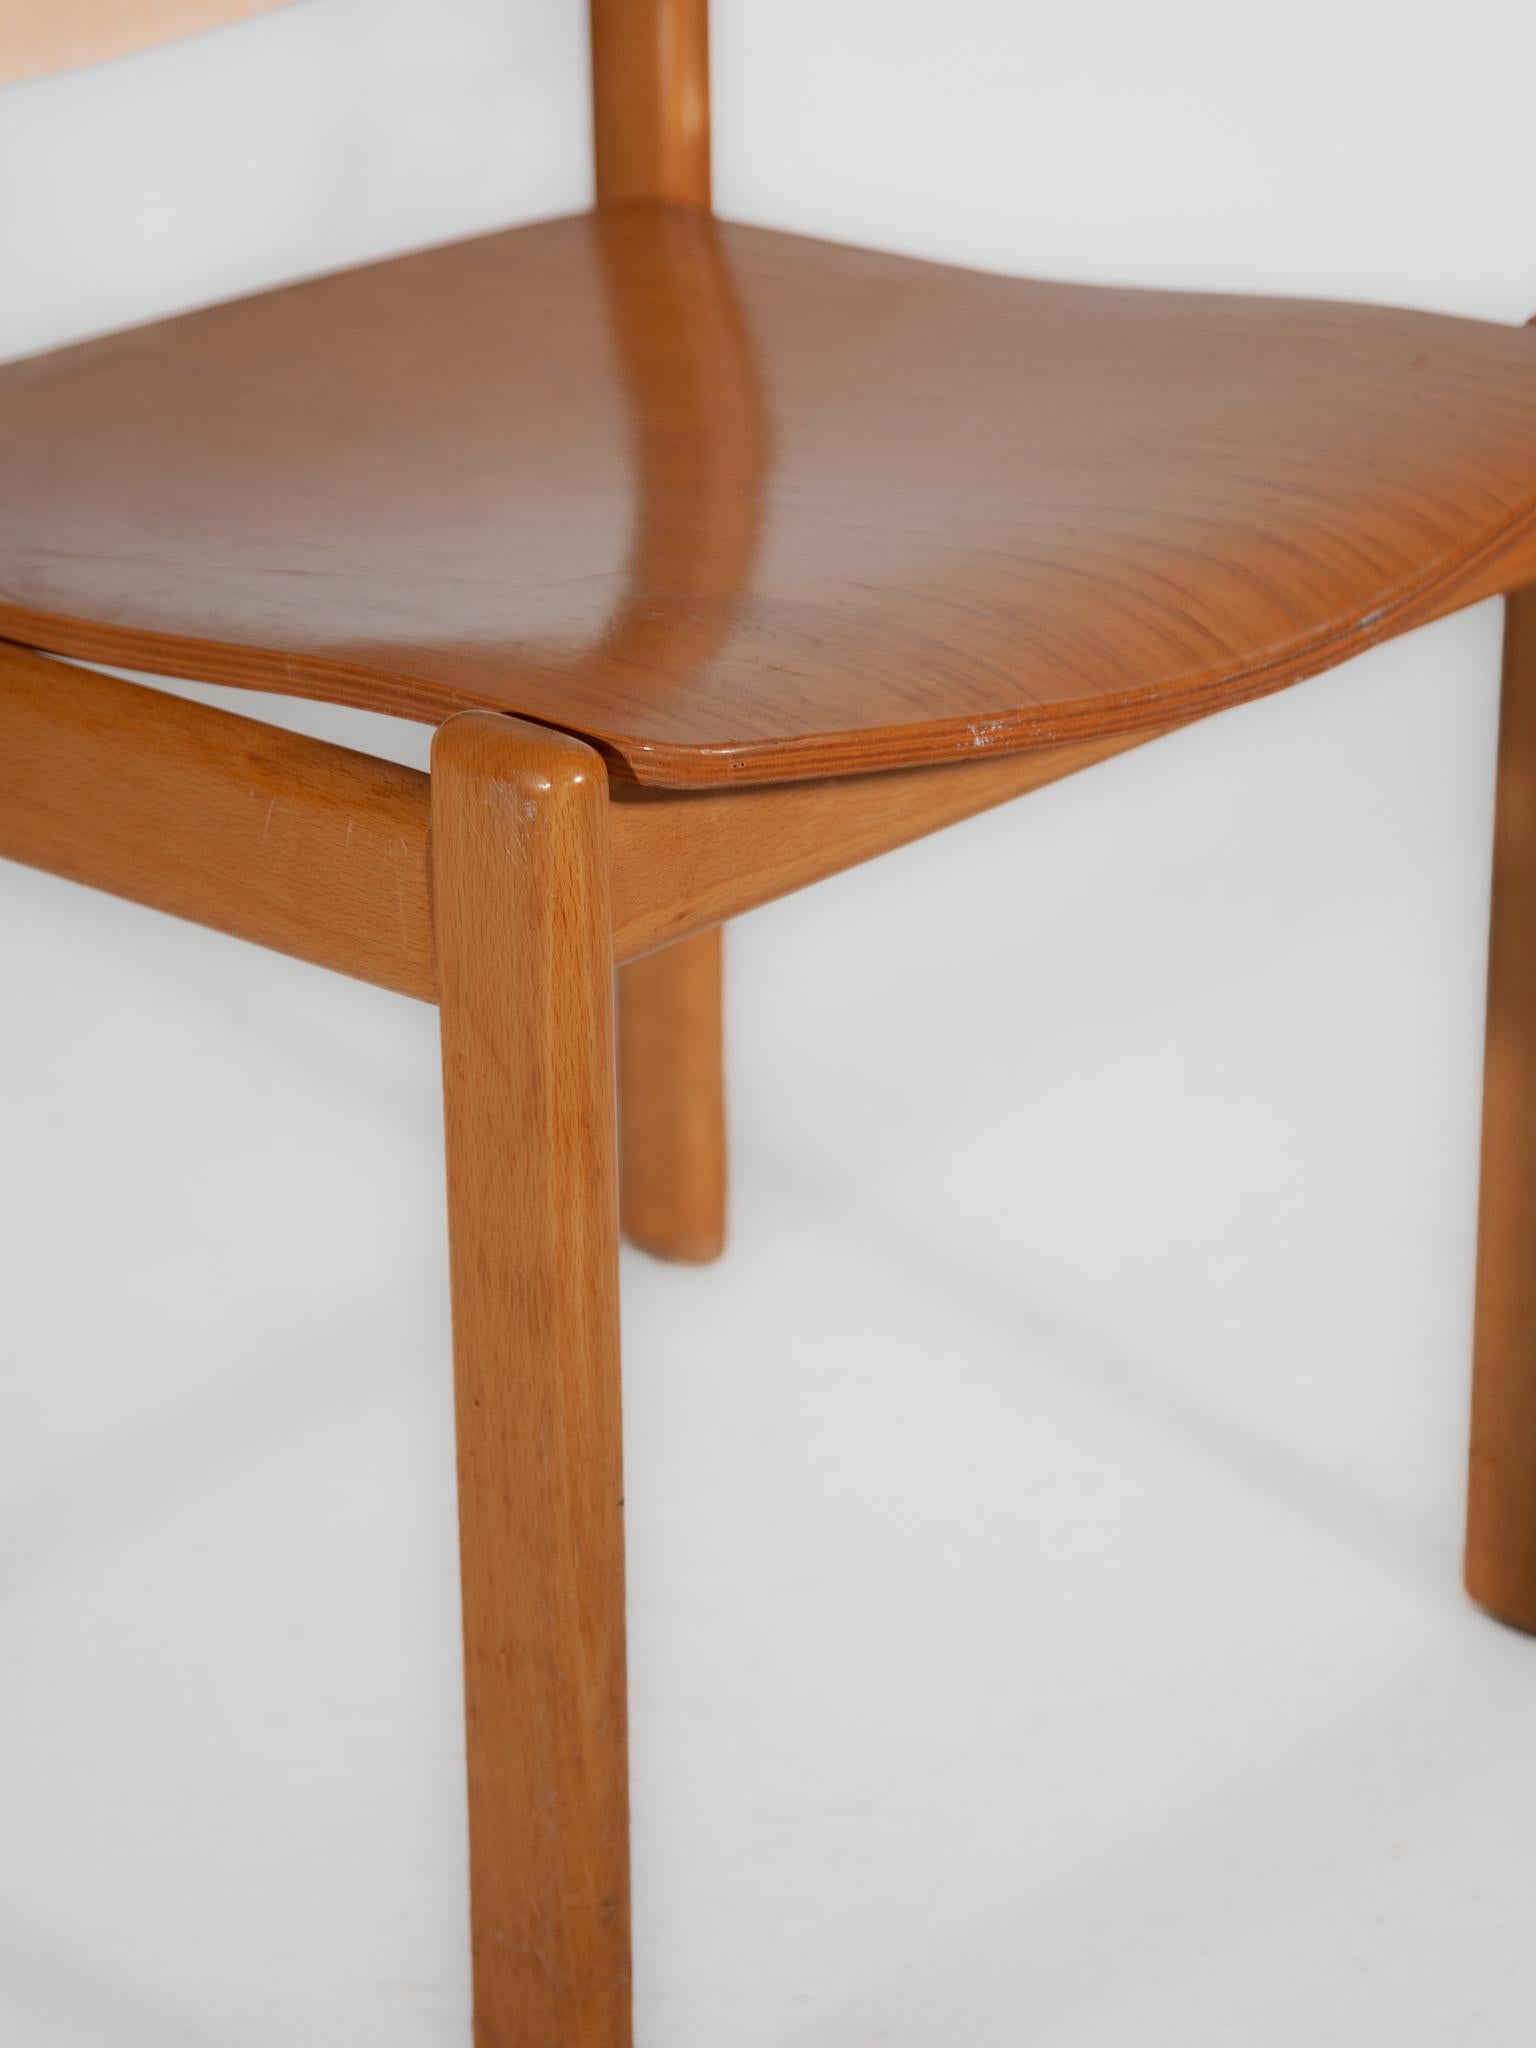 Set of Twelve Beech Wood Dining Chairs, Germany 1970s For Sale 4